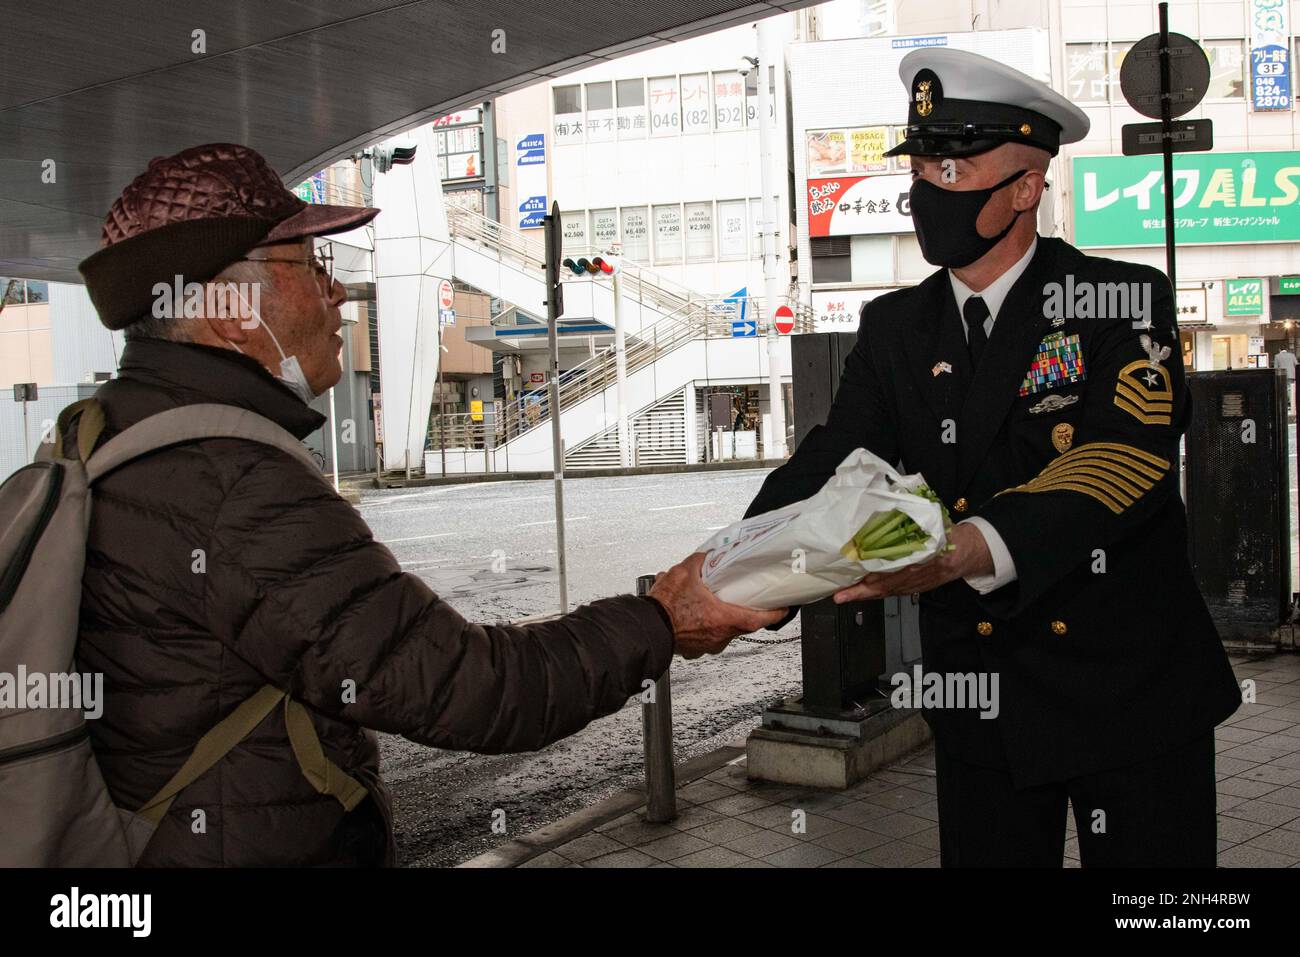 YOKOSUKA, Japan (Dec. 13, 2022) — Command Master Chief Robert Beachy, assigned to Commander, Fleet Activities Yokosuka (CFAY) hands out a Japanese daikon radish to a pedestrian at Yokosuka Chuo Station during an event raising awareness of drunk driving during the holiday season. “Daikon” is a play on words as it is close to the Japanese word “daikonzetsu”, meaning eradication (of drunk driving). For more than 75 years, CFAY has provided, maintained, and operated base facilities and services in support of the U.S. 7th Fleet’s forward deployed naval forces, tenant commands, and thousands of mili Stock Photo